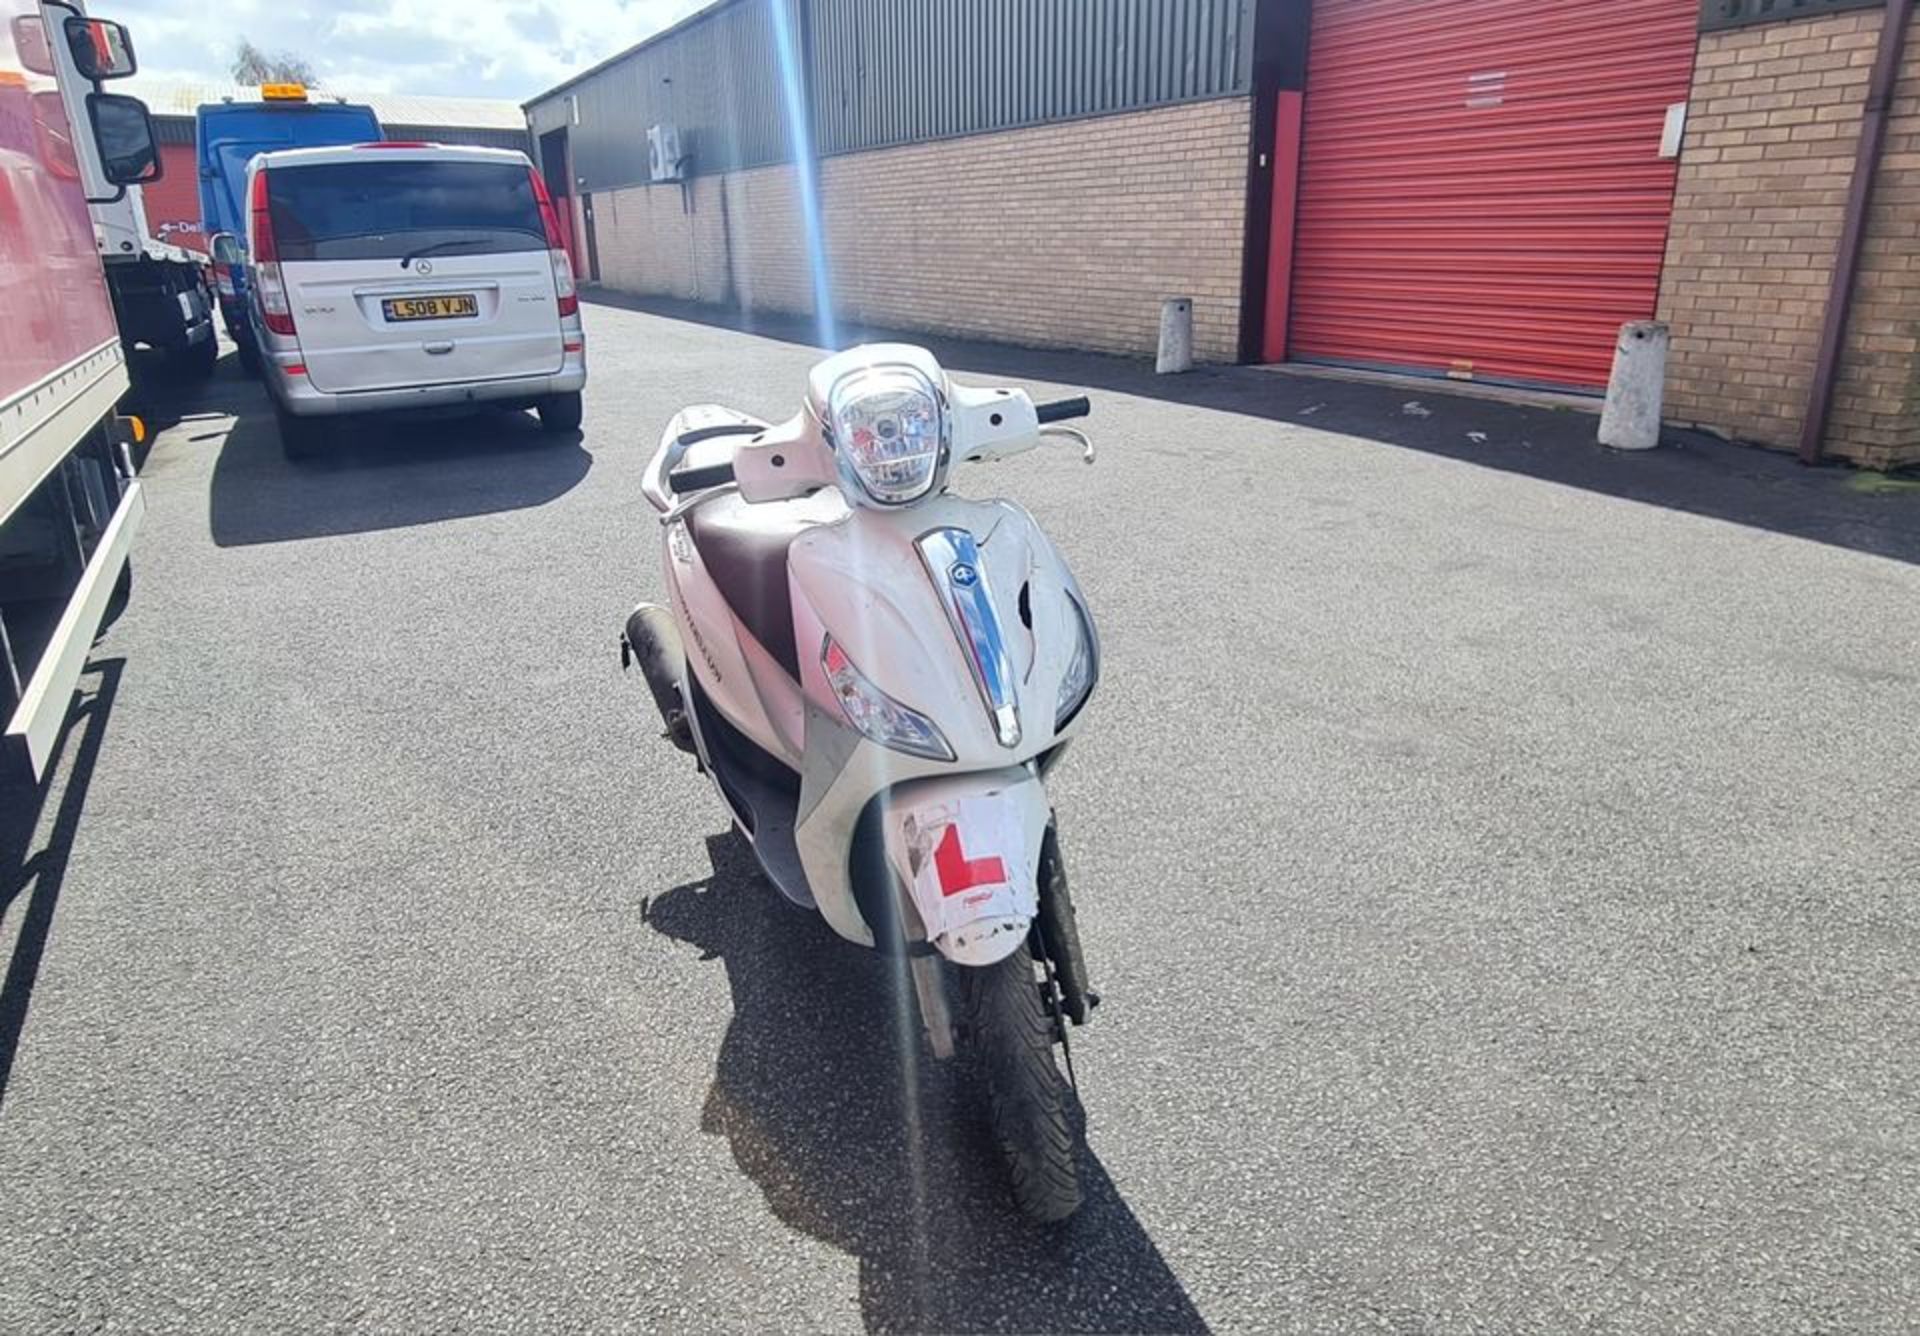 2016 Piaggio Medley 125 Scooter - Missing Key - Image 9 of 13